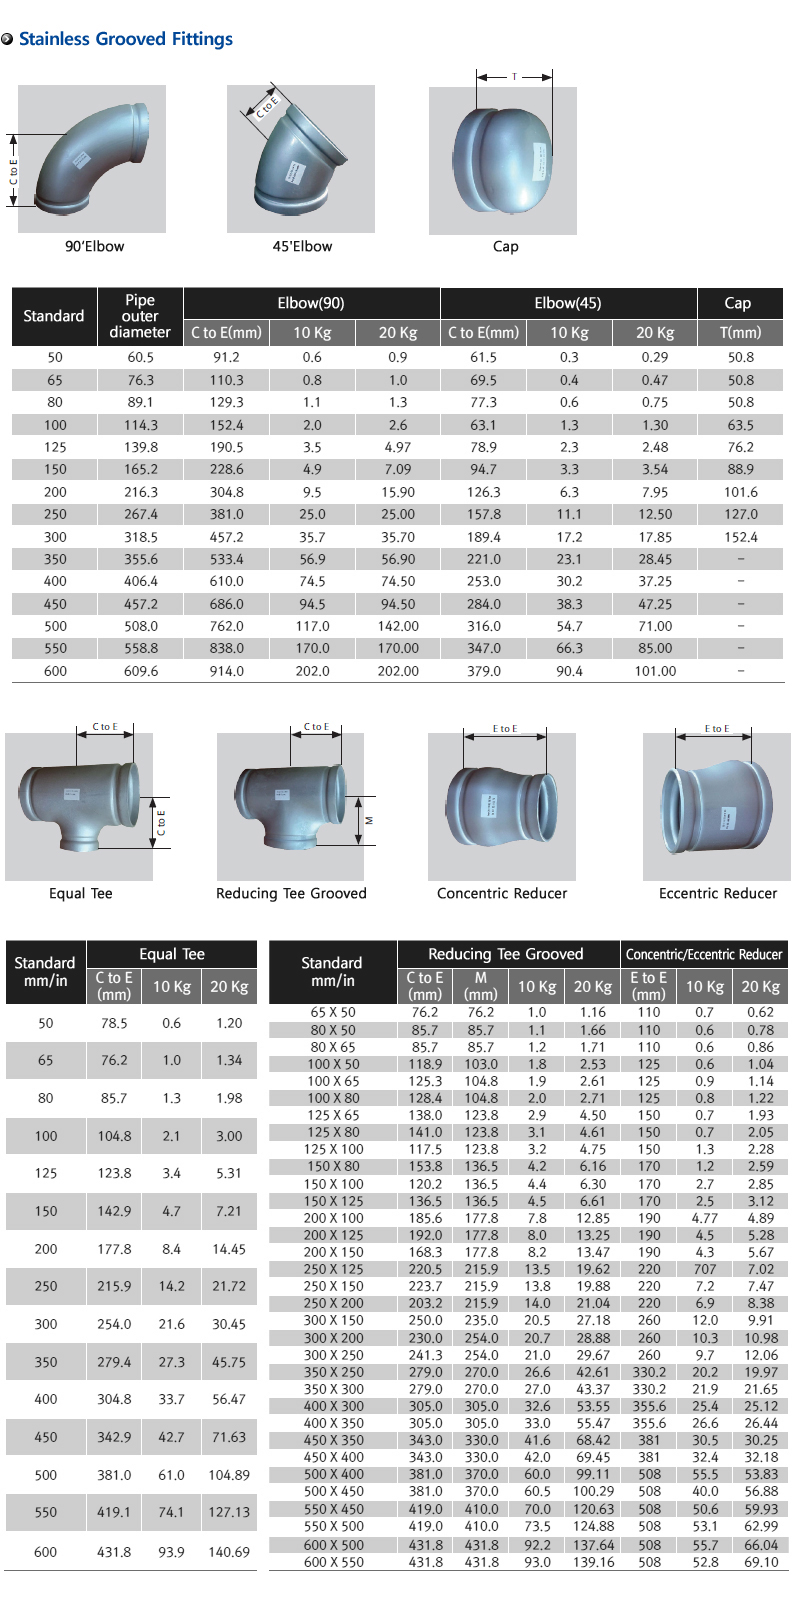 Stainless Grooved Fittings